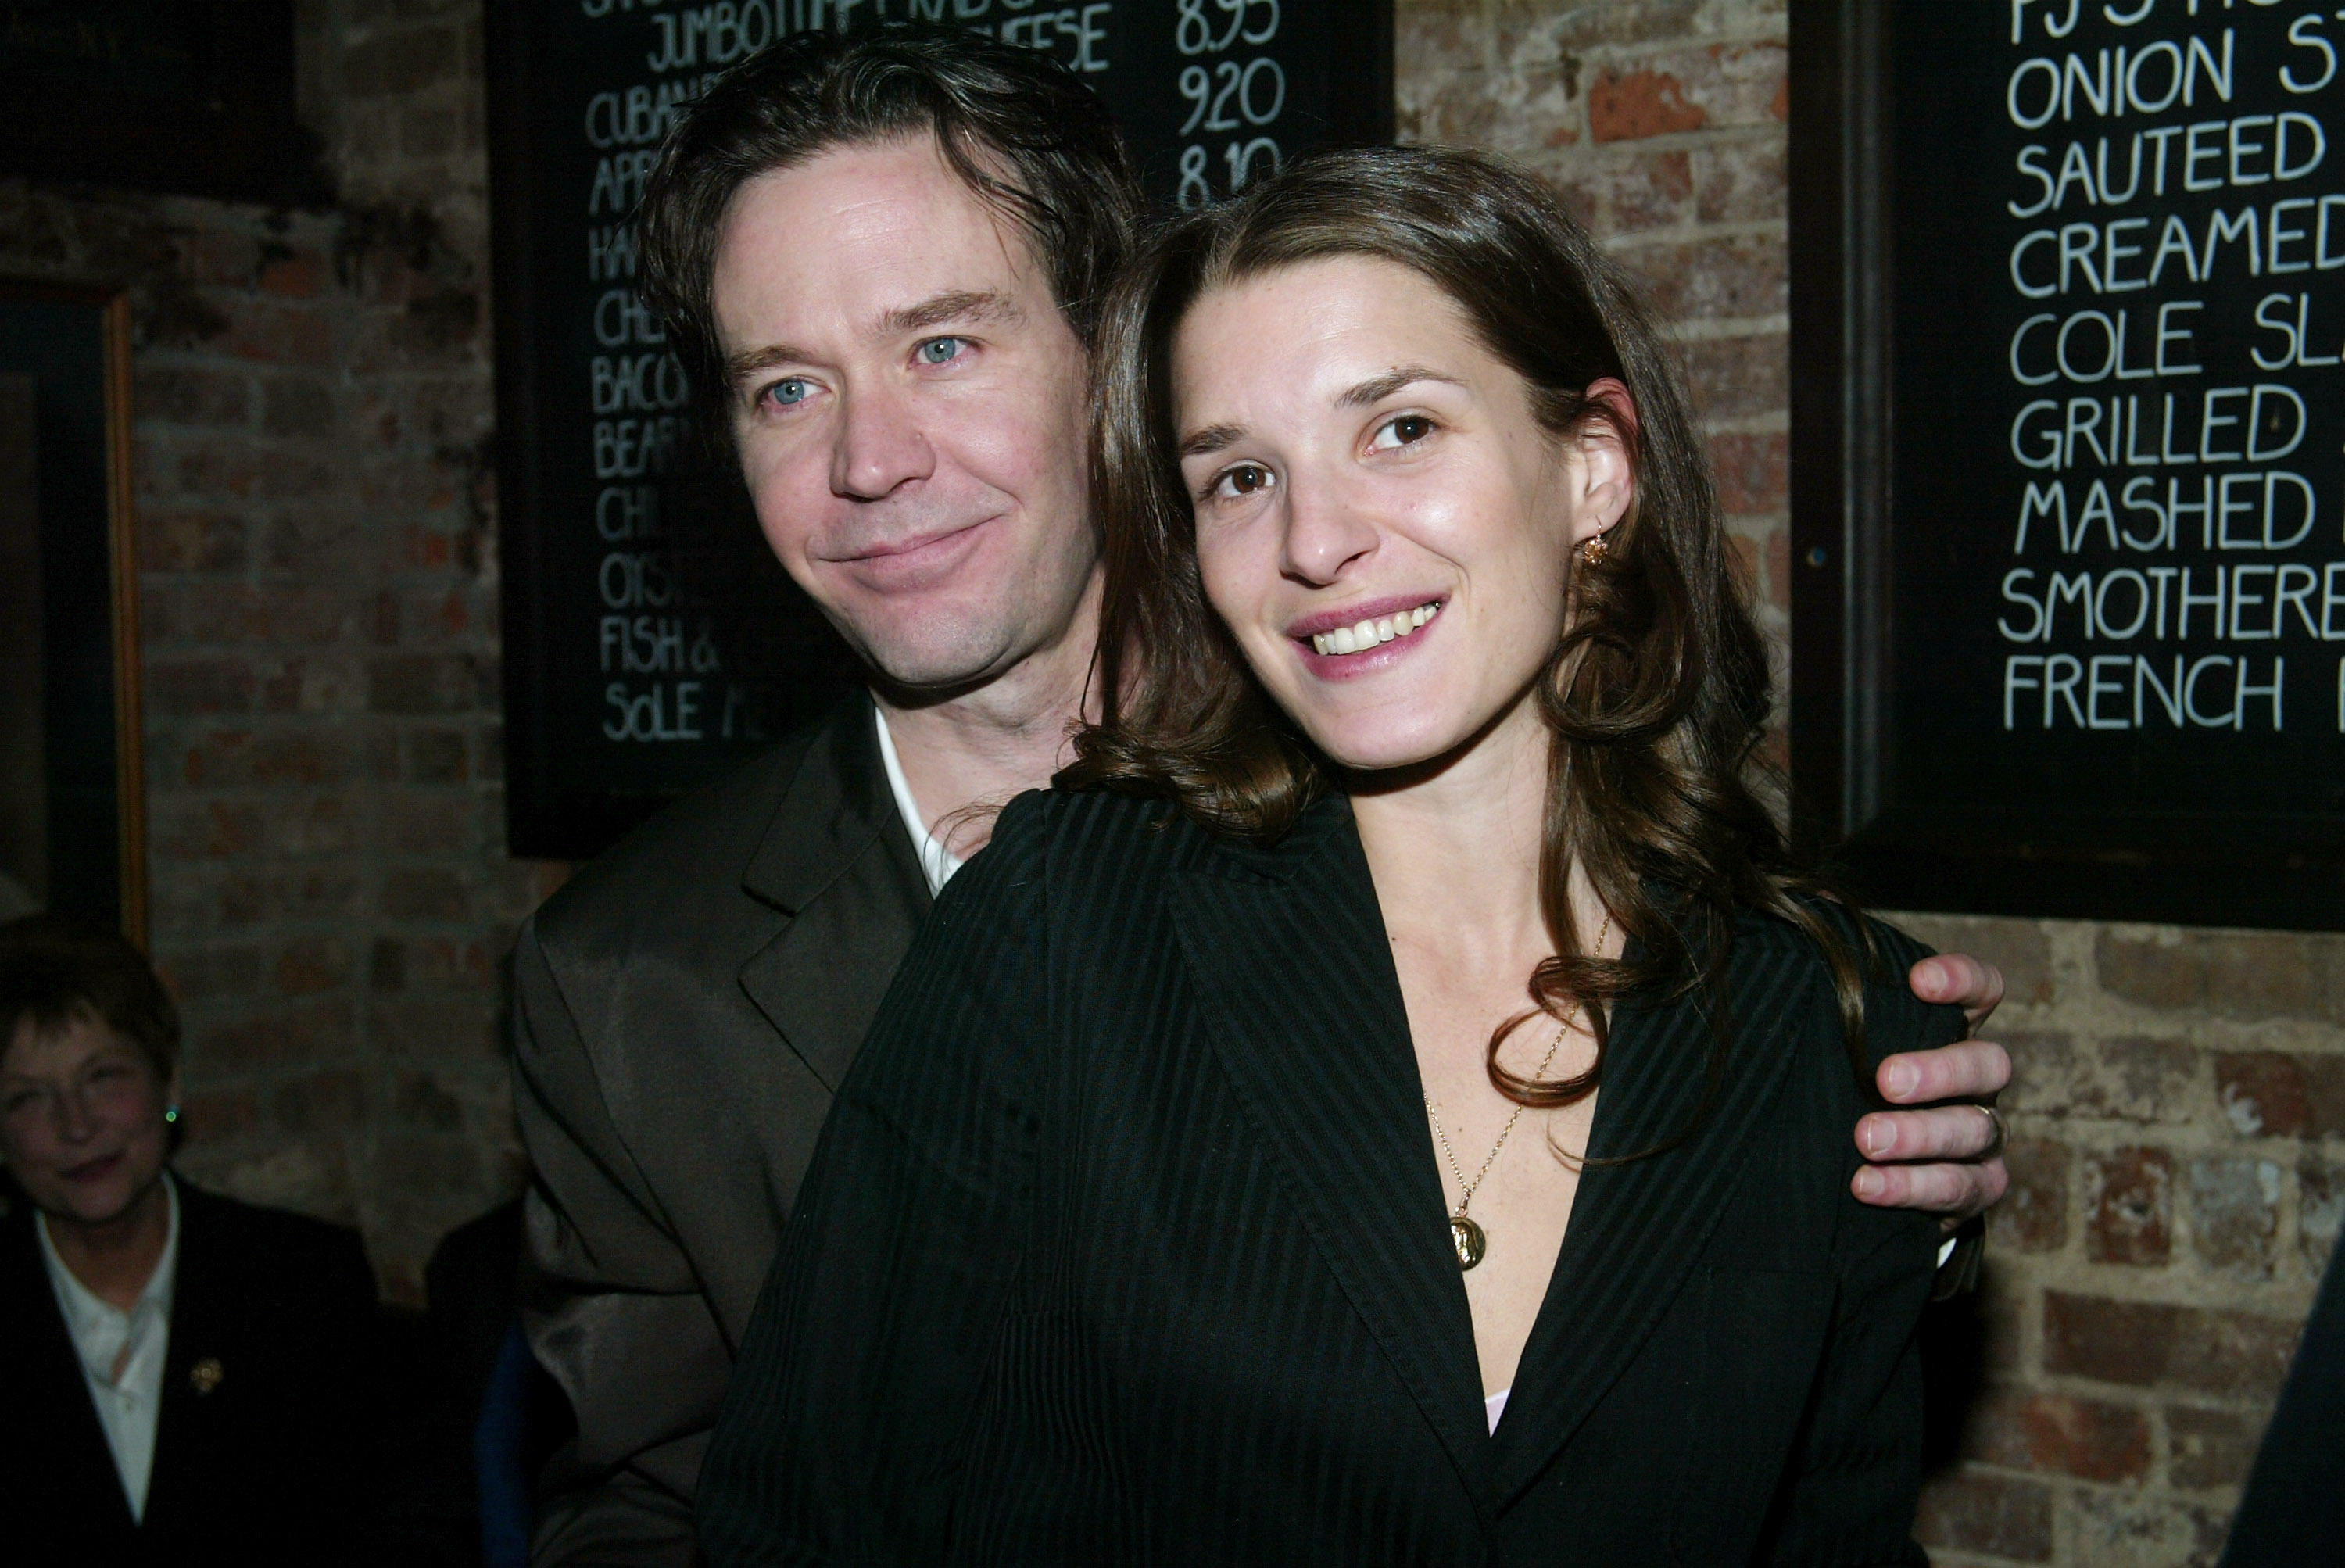 Timothy Hutton and Aurore Giscard d'Estaing at Esquire Magazine's 70th Anniversary in 2003, in New York City. | Source: Getty Images